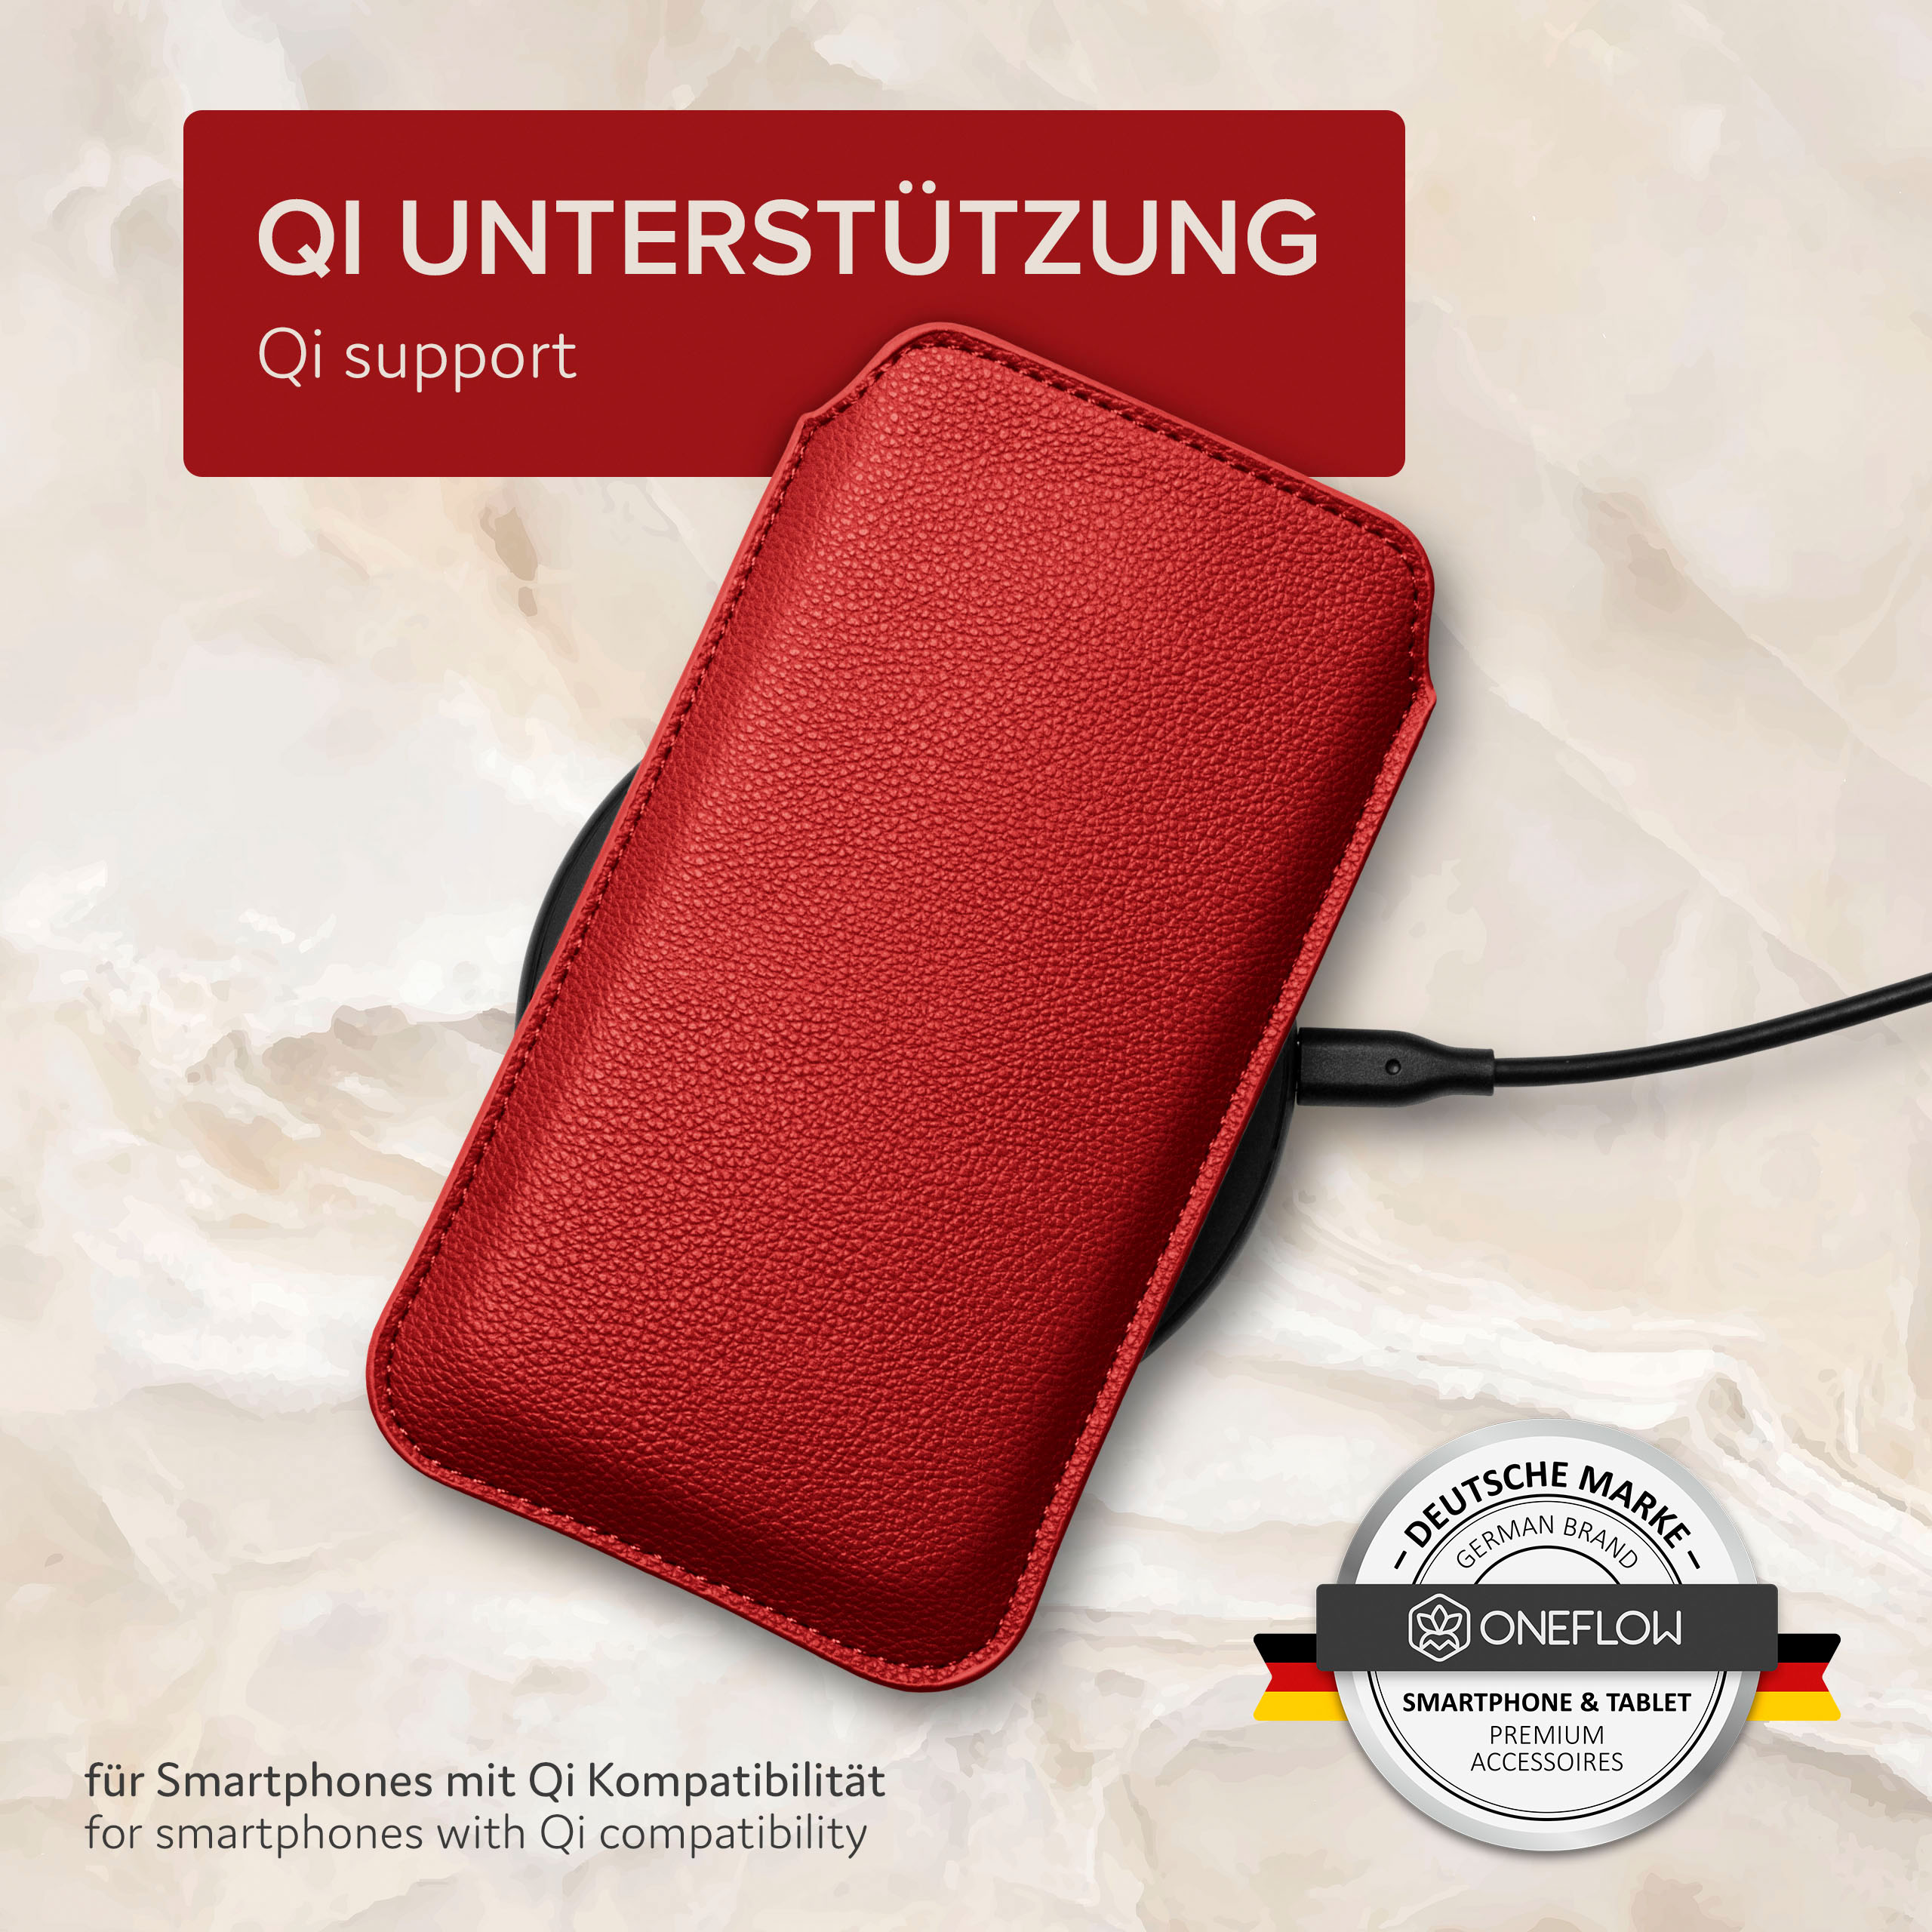 Xperia Cover, Einsteckhülle Full Sony, Zuglasche, Dunkelrot ONEFLOW mit Compact, Z5